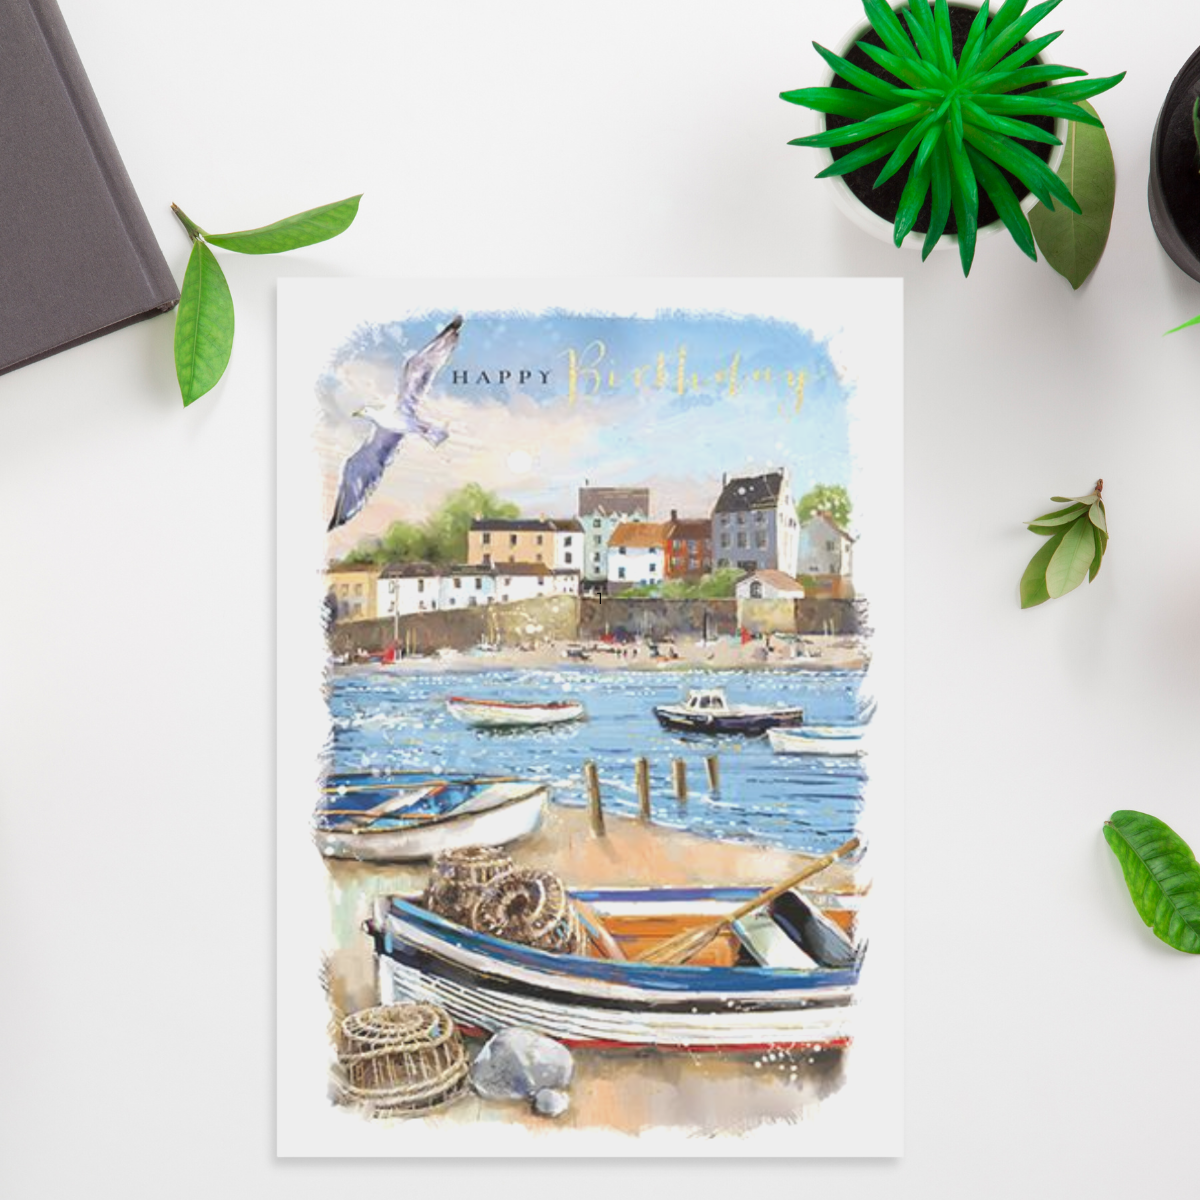 Seaside Scene Complete With Boats Greeting Card Design